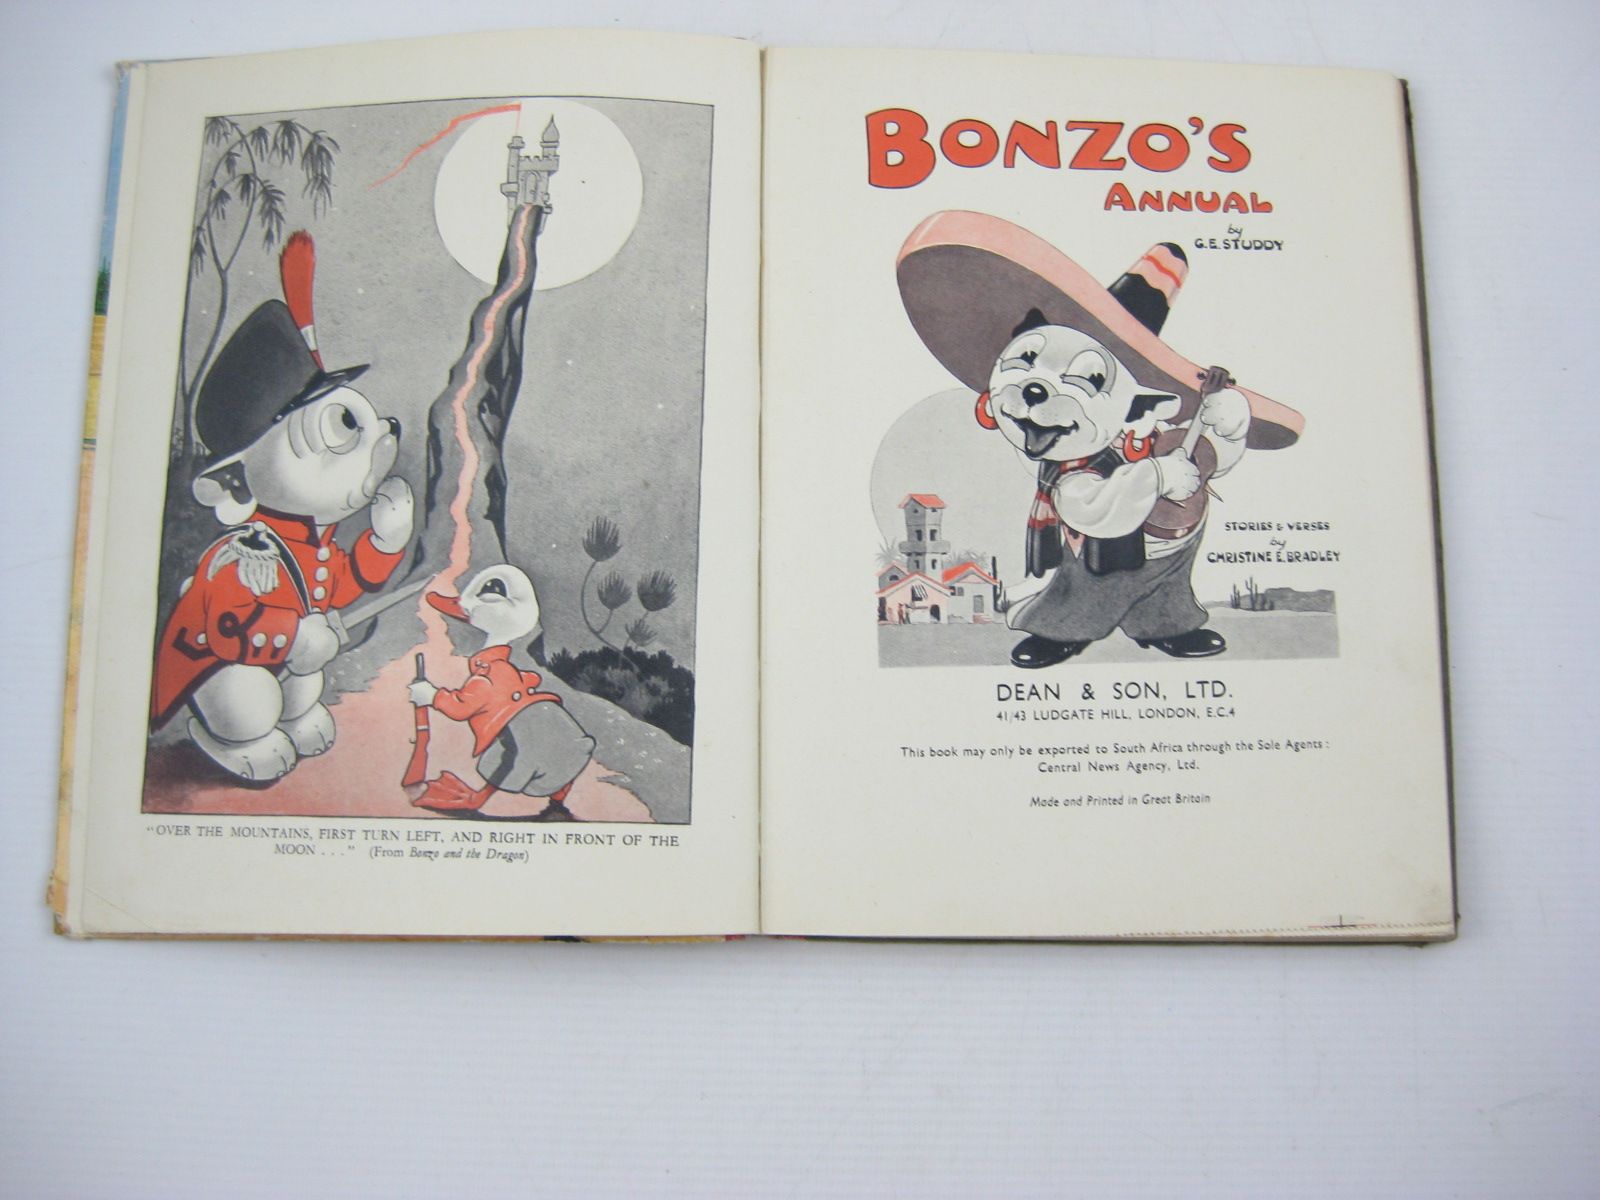 Photo of BONZO'S ANNUAL 1951 written by Studdy, G.E.
Bradley, Christine E. illustrated by Studdy, G.E. published by Dean & Son Ltd. (STOCK CODE: 1503215)  for sale by Stella & Rose's Books